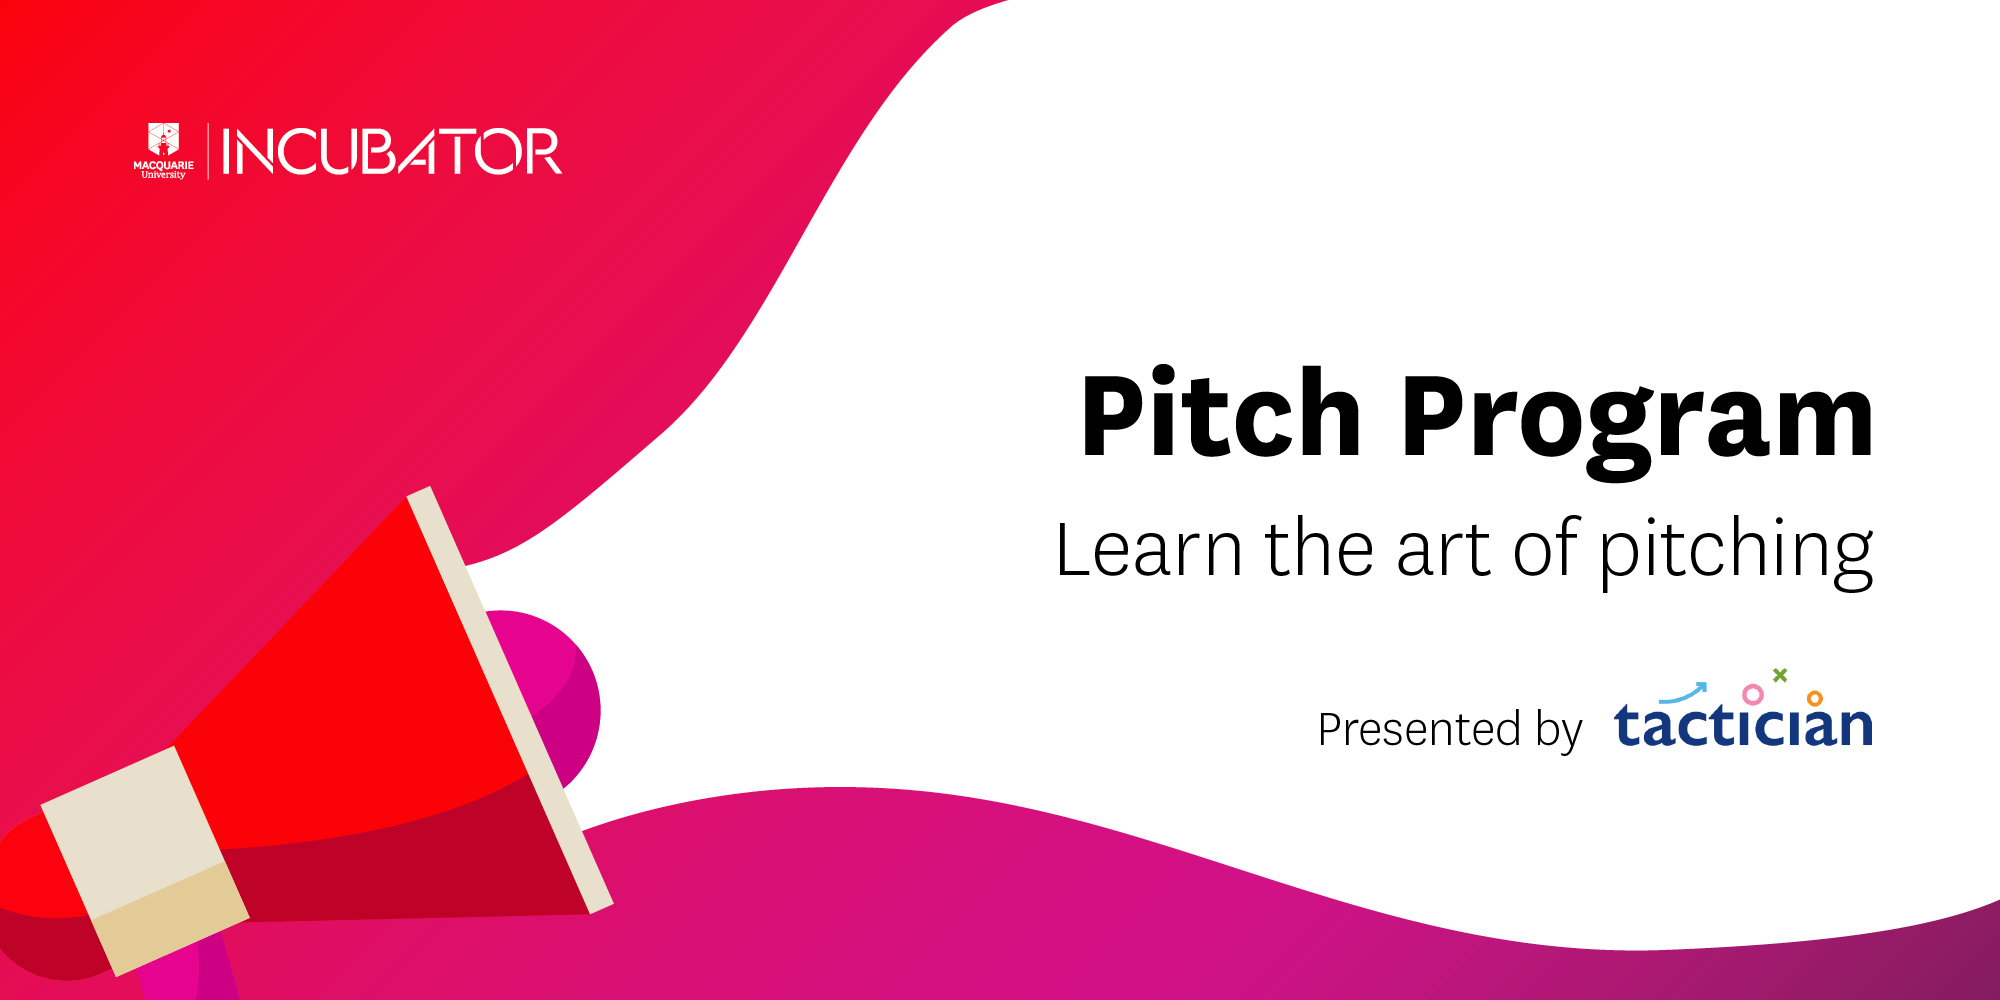 Pitch Program. Learn the art of pitching. Presented by tactician.